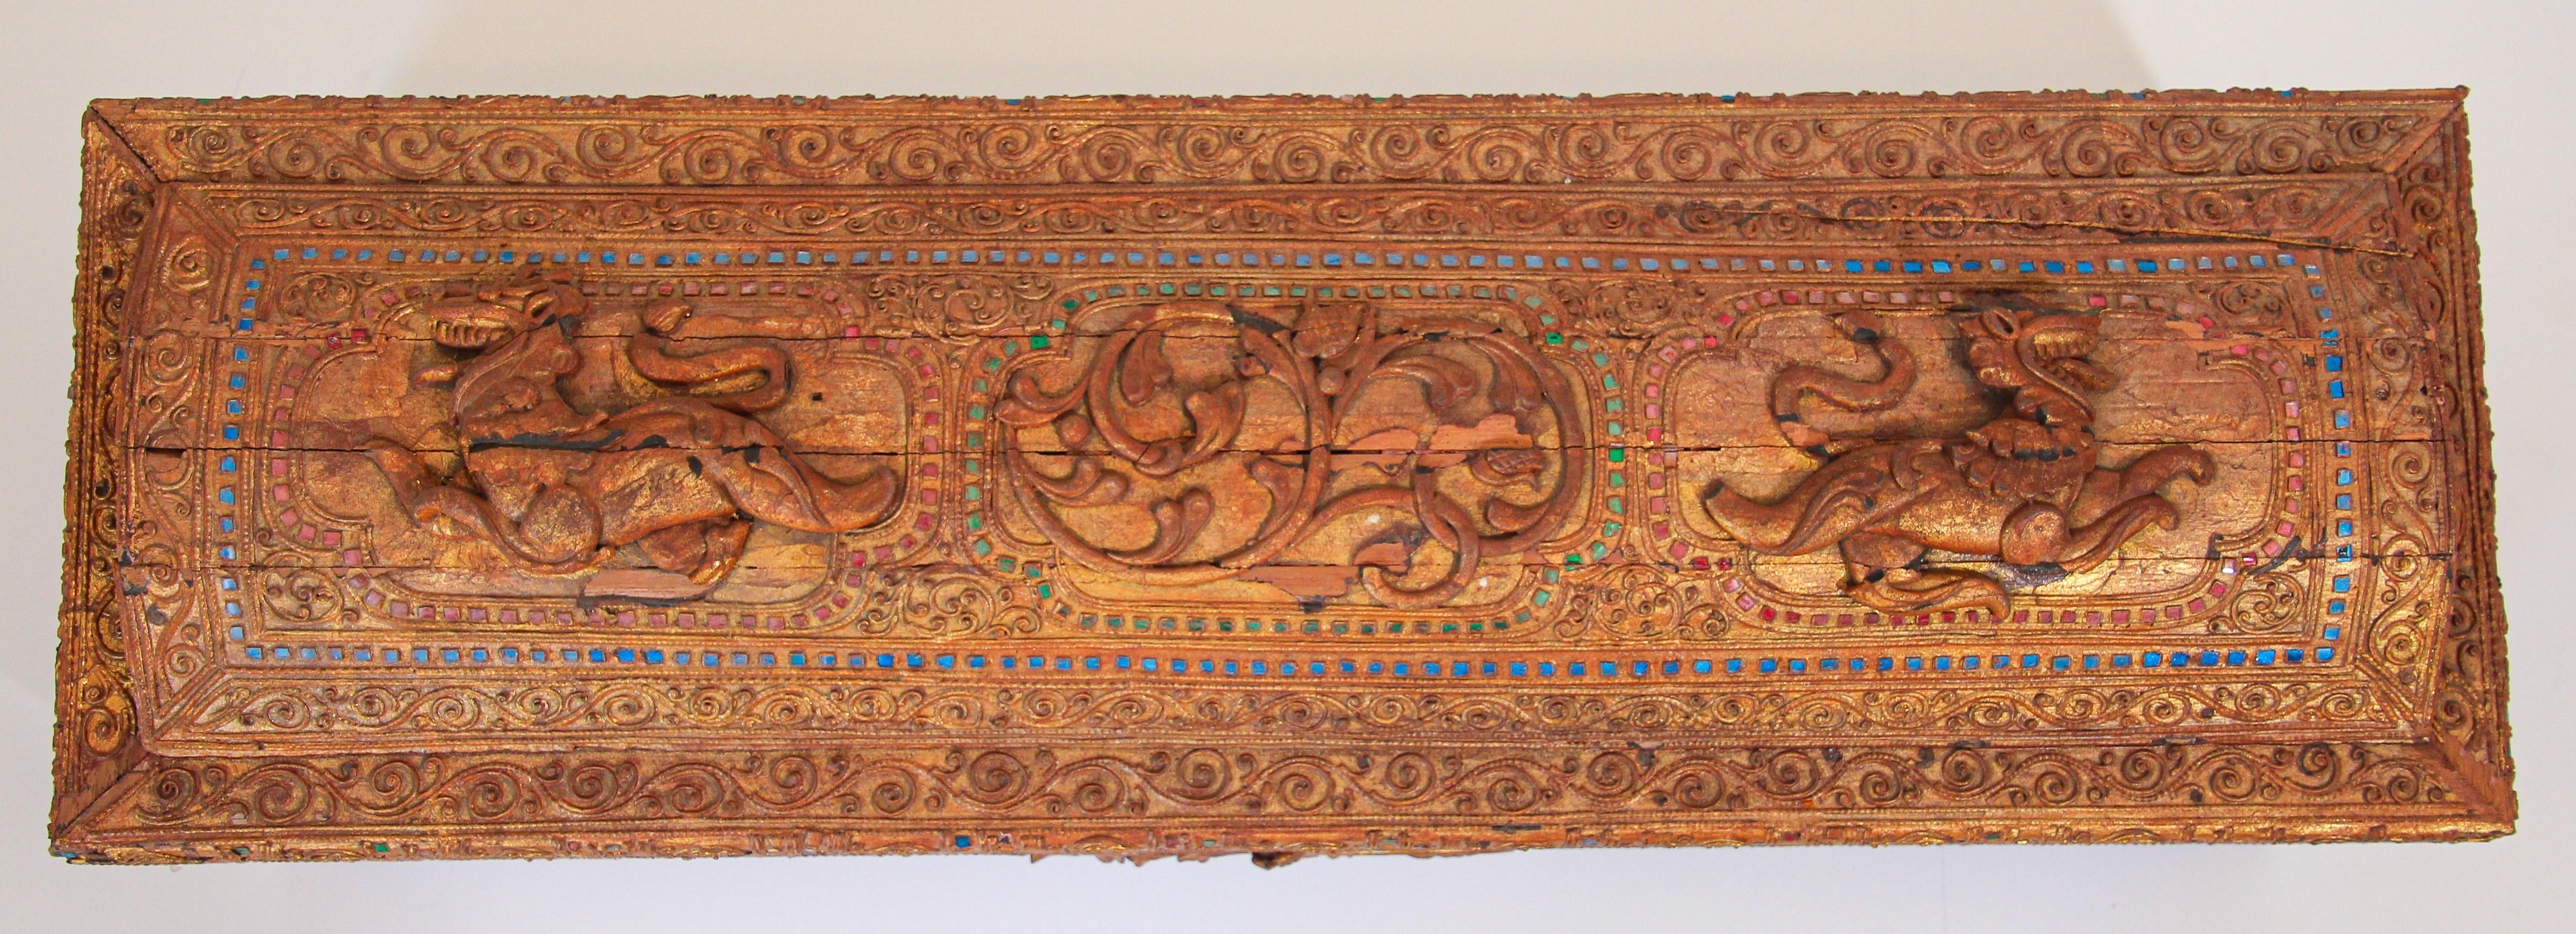 Gilt Lacquer Wood Manuscript Storage Box Burma 19th Century In Fair Condition For Sale In North Hollywood, CA